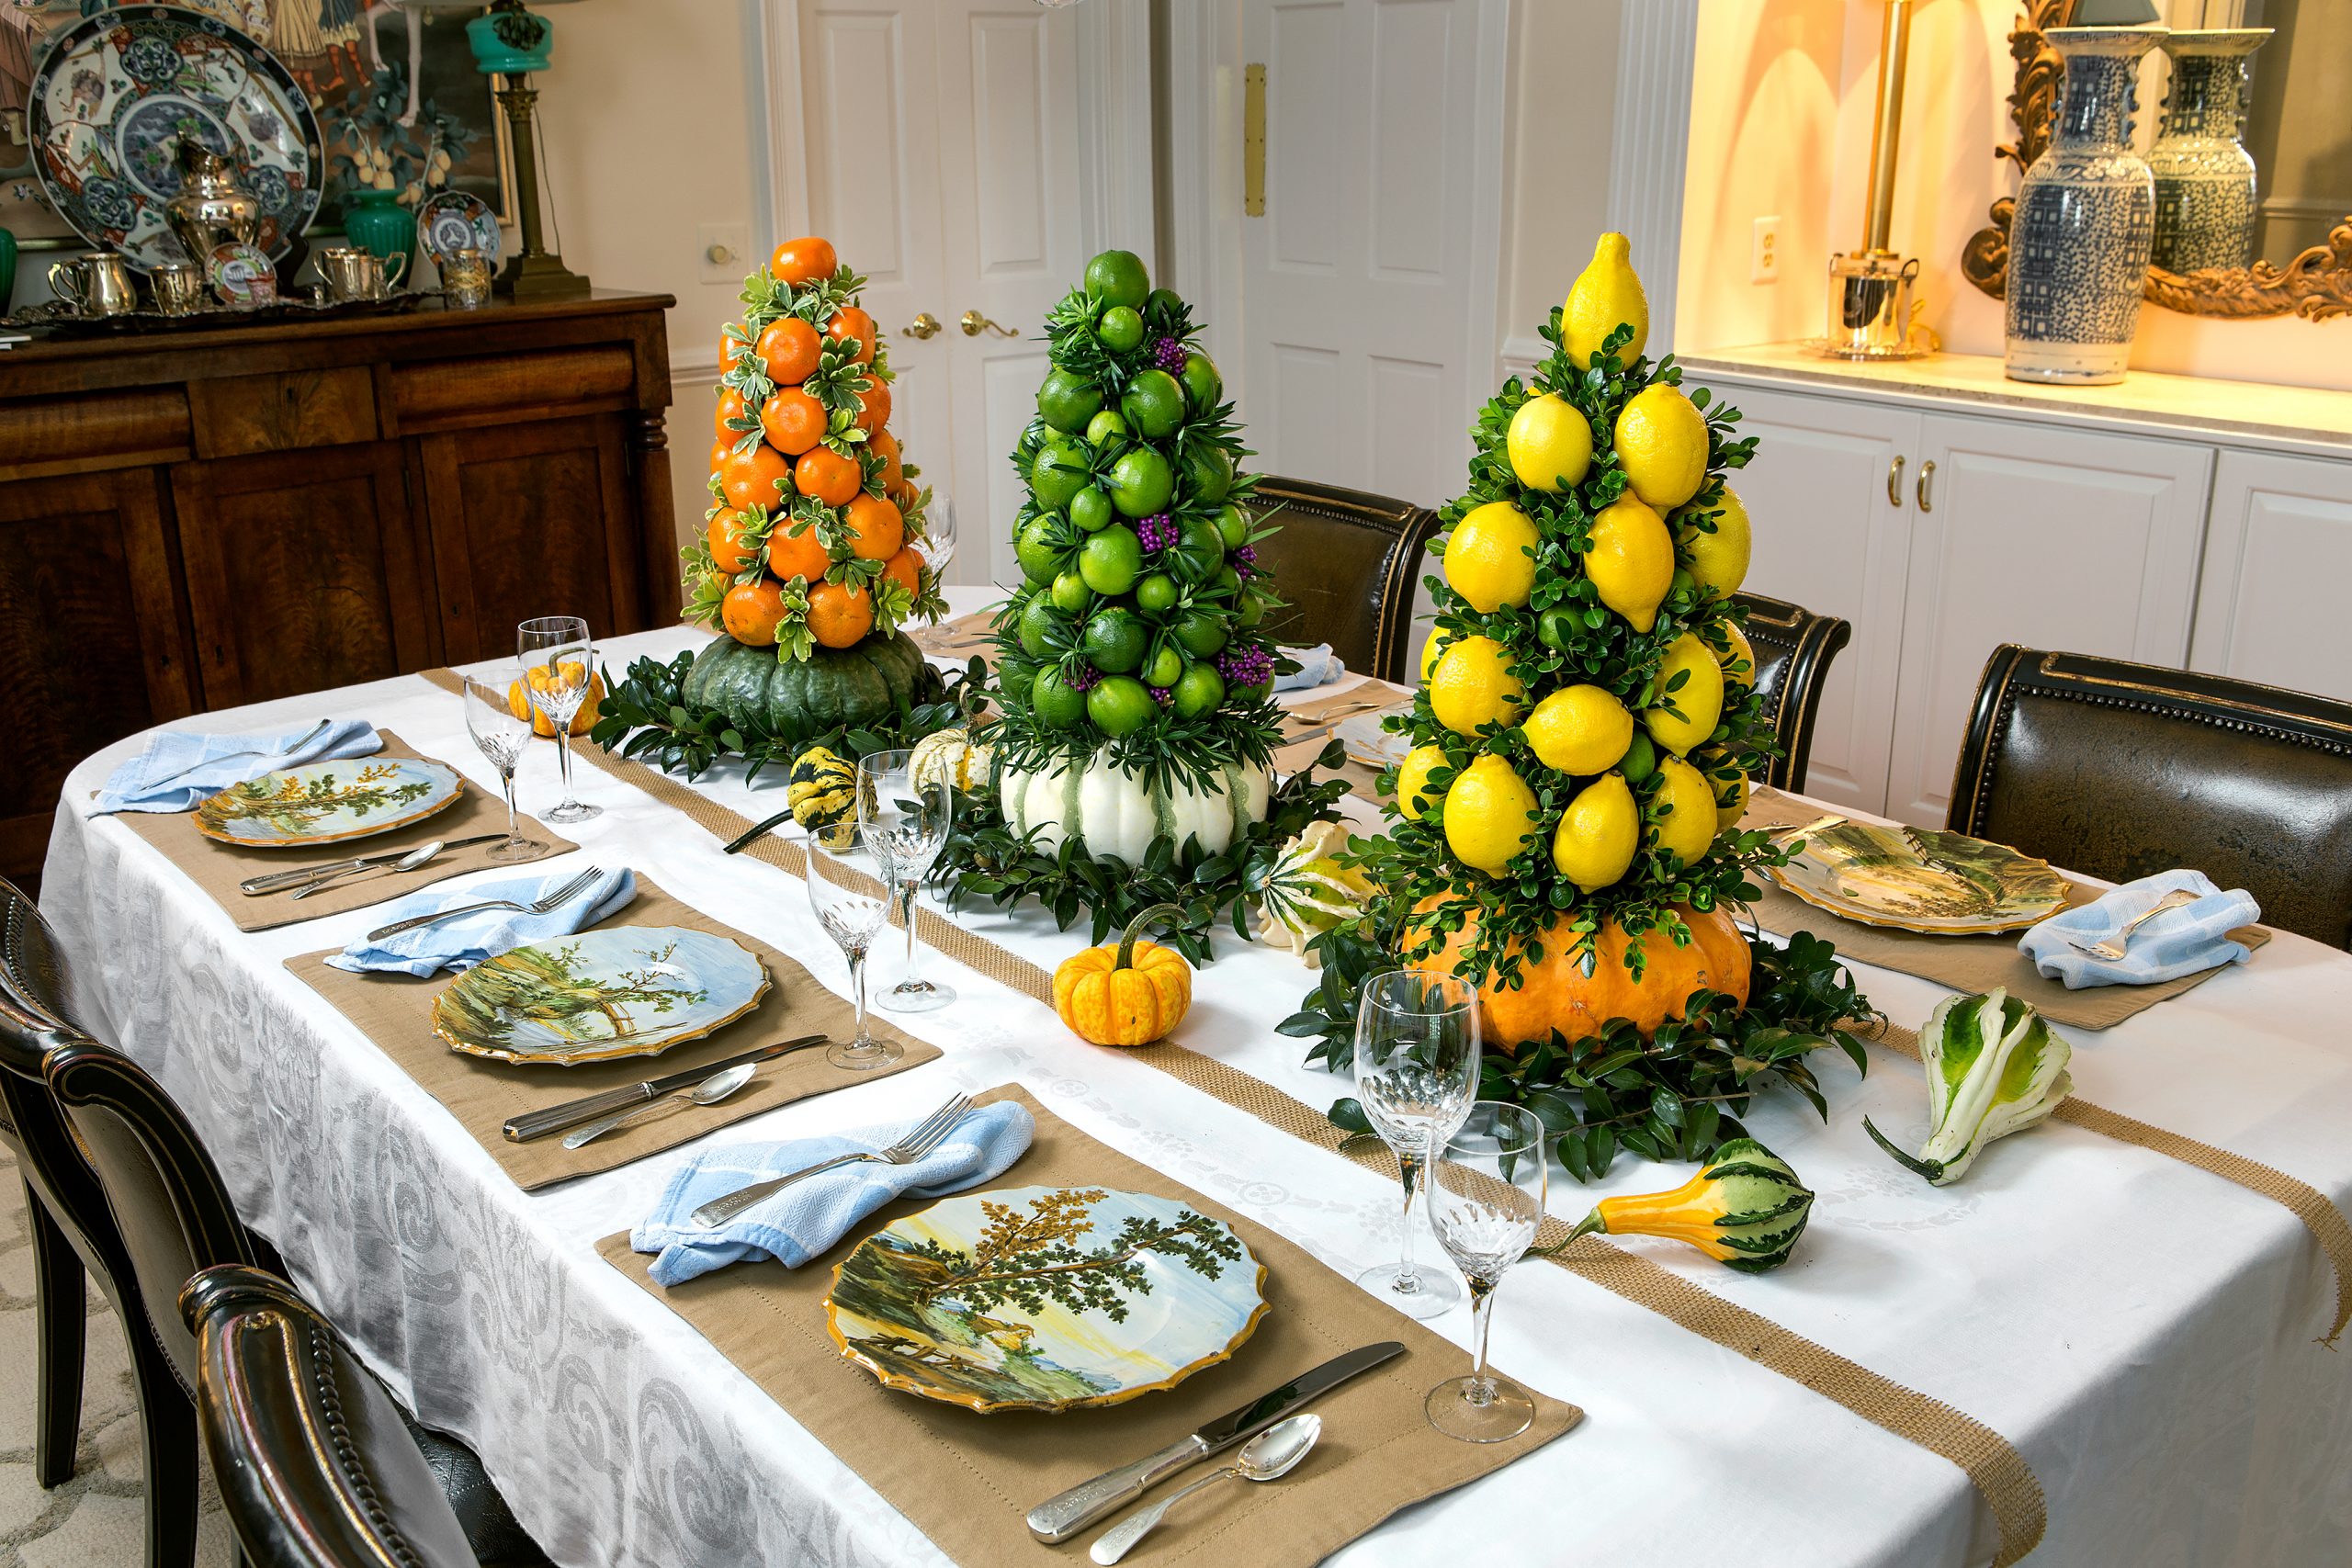 The addition of pumpkins to the base of the fruit topiaries, small gourds and burlap runners across the table, and a more casual set of placemats and napkins transform the formal table to a more rustic holiday setting. 